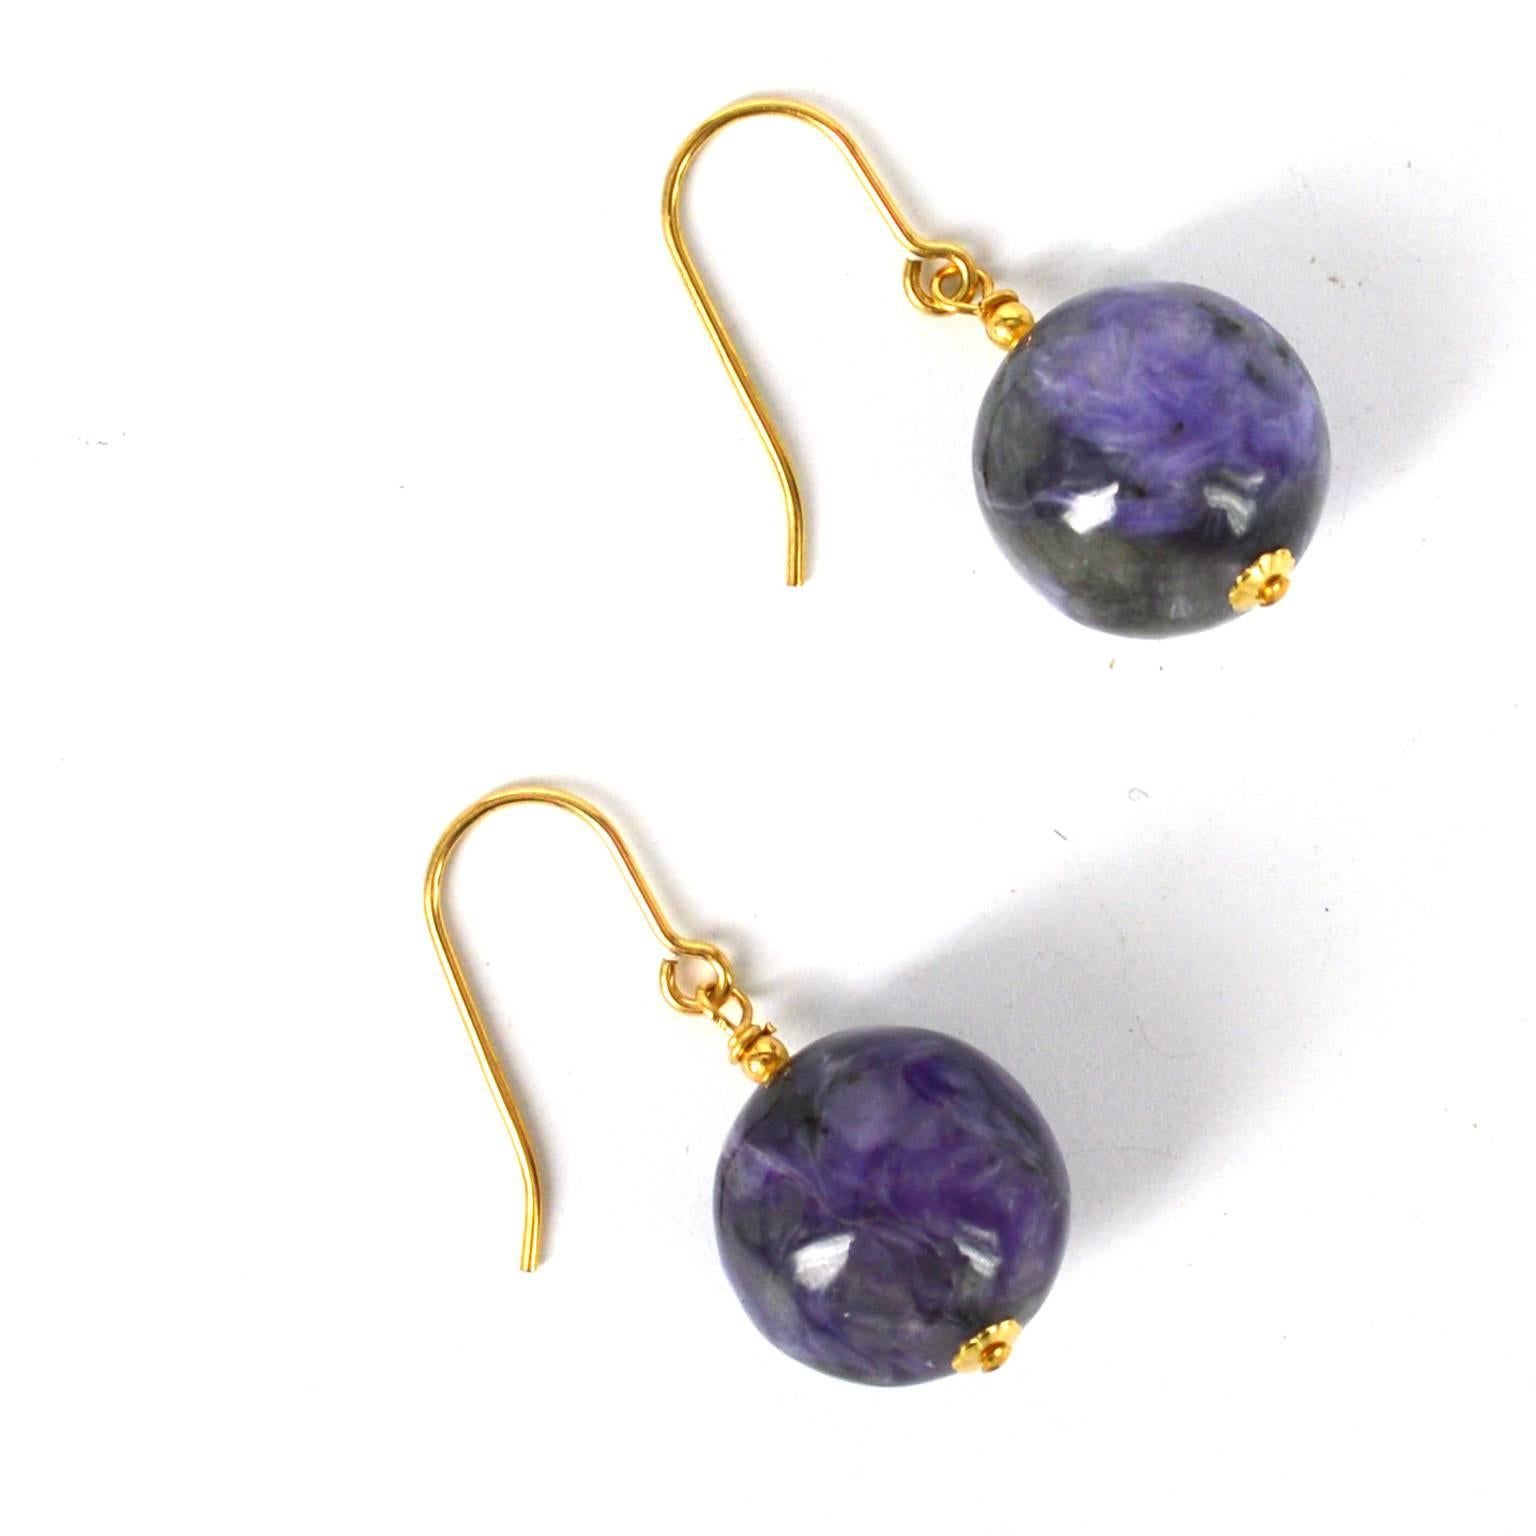 Purple Charoite 14mm beads with 14k Gold Filled findings, much brighter than the image shows.
earrings fall 32mm from the ear.